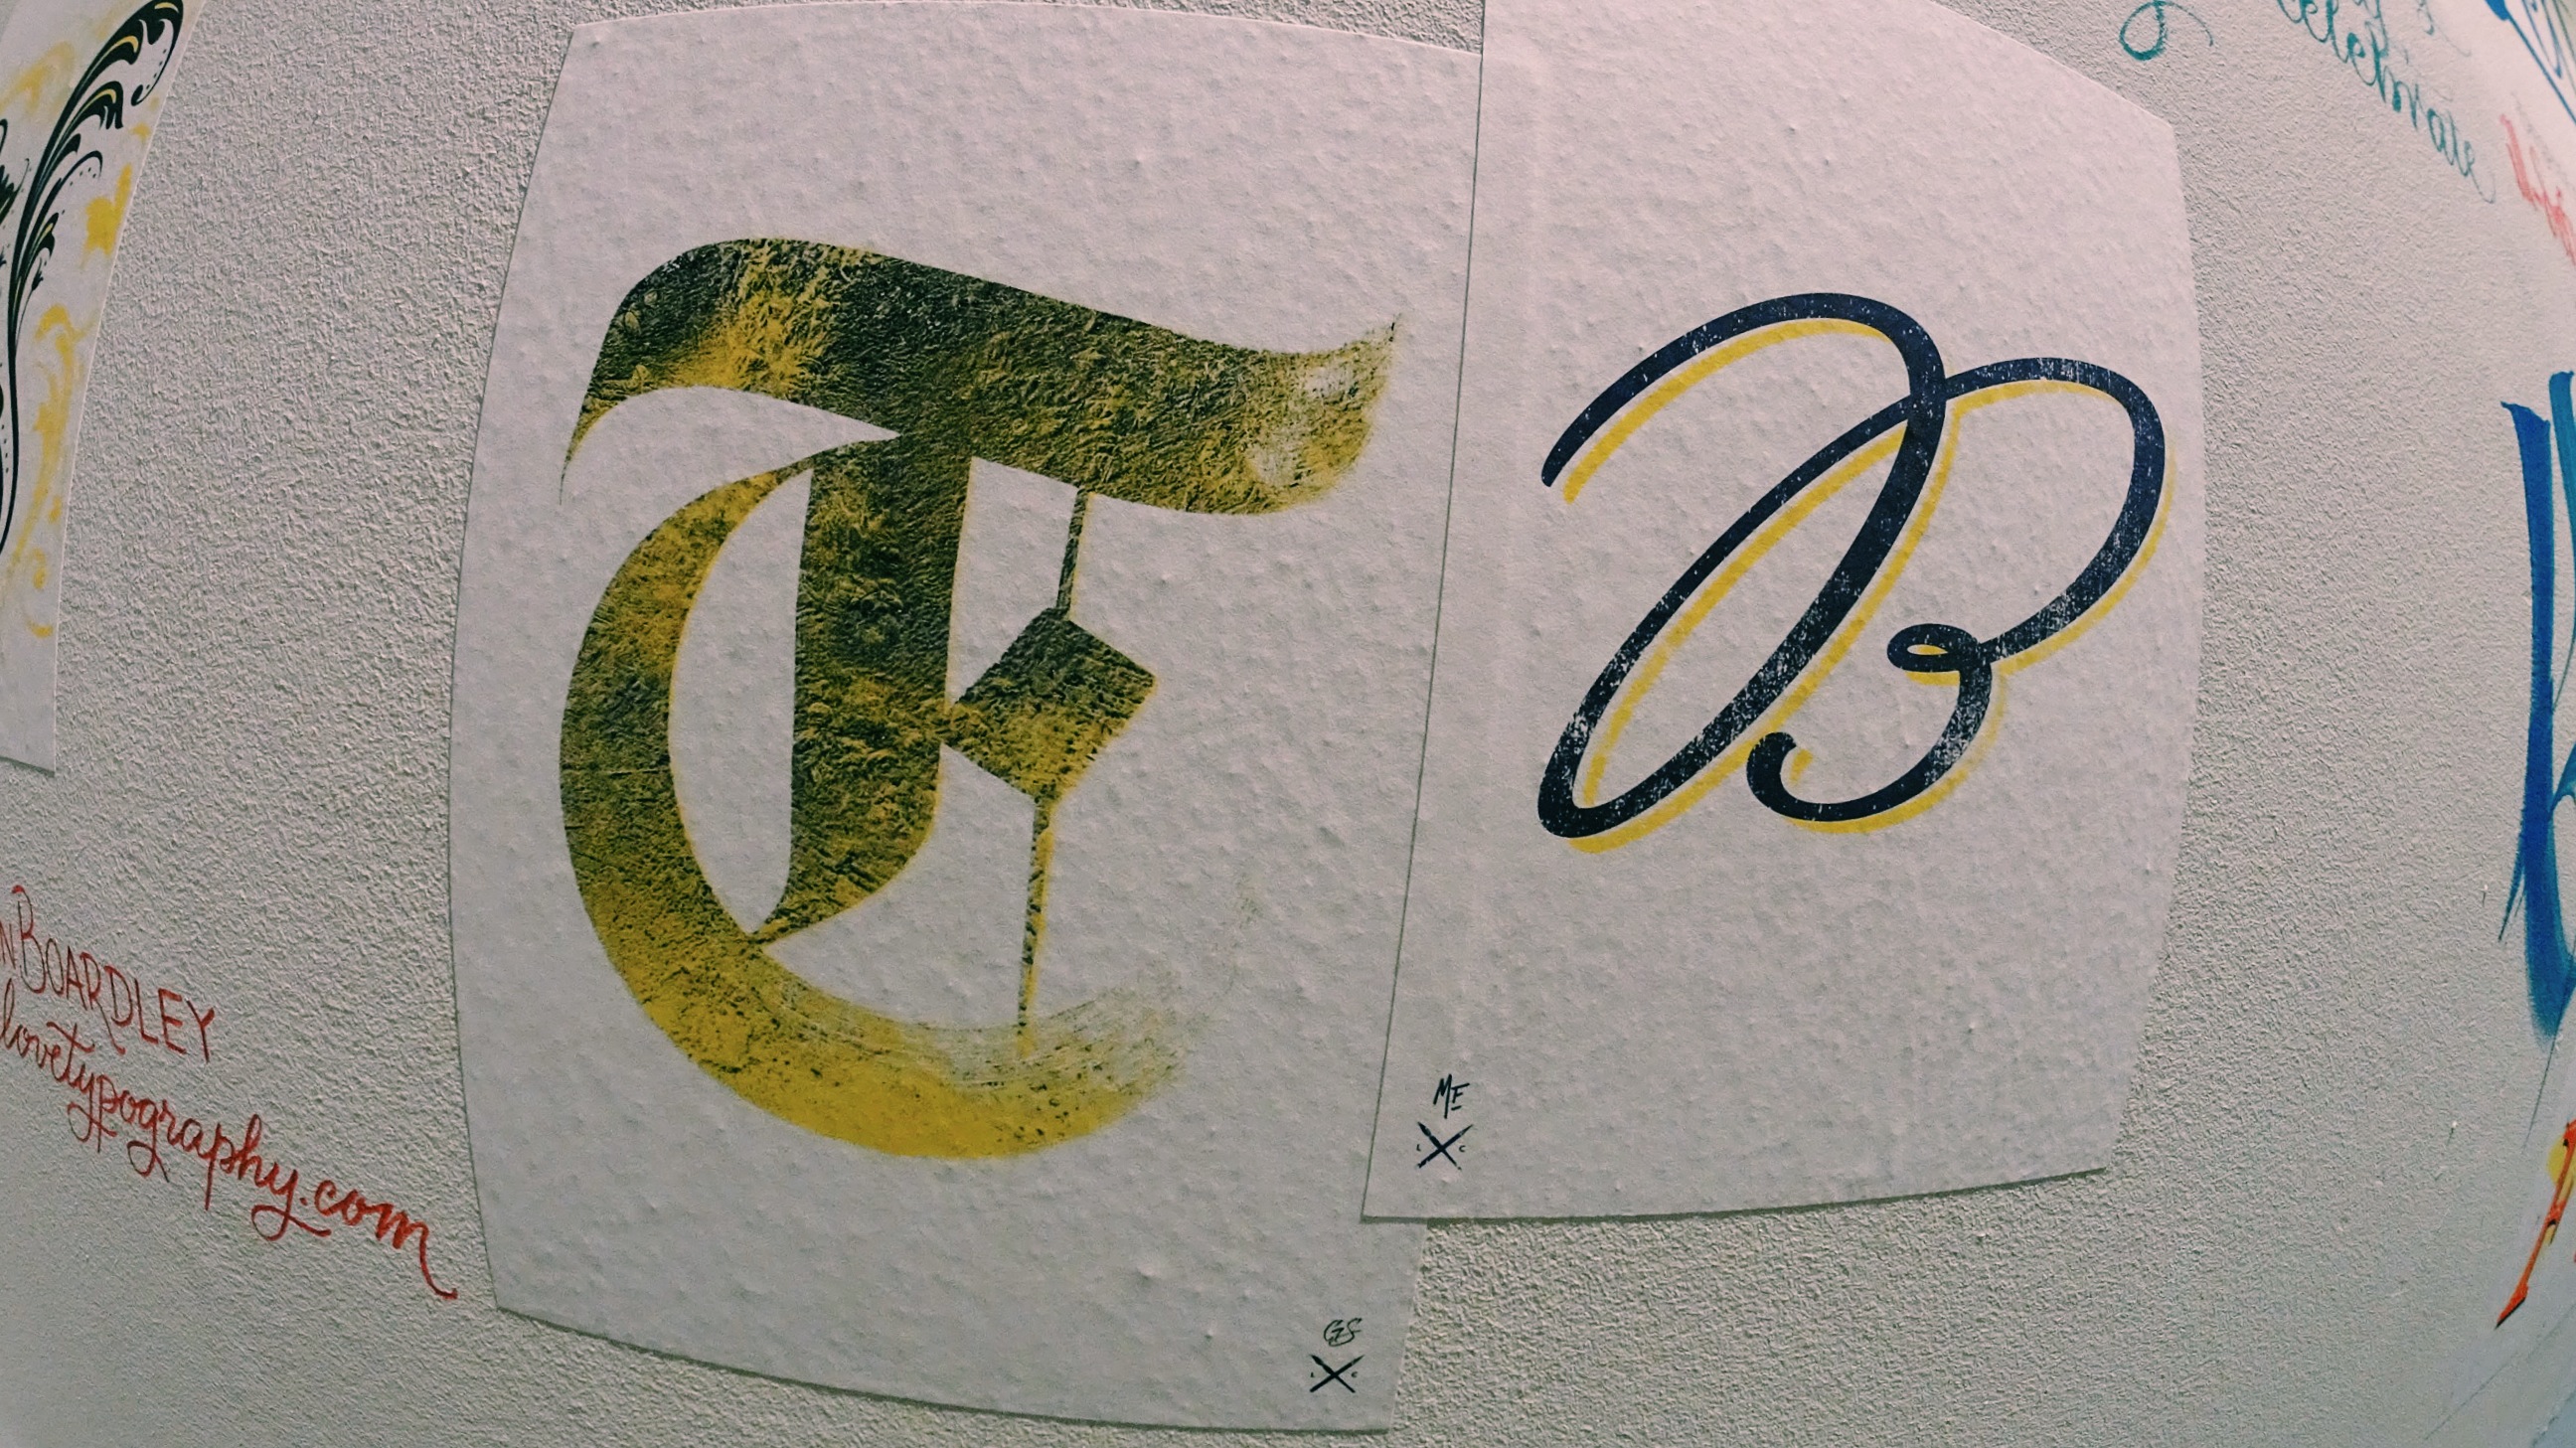 On the Wall - Lettering versus Calligraphy